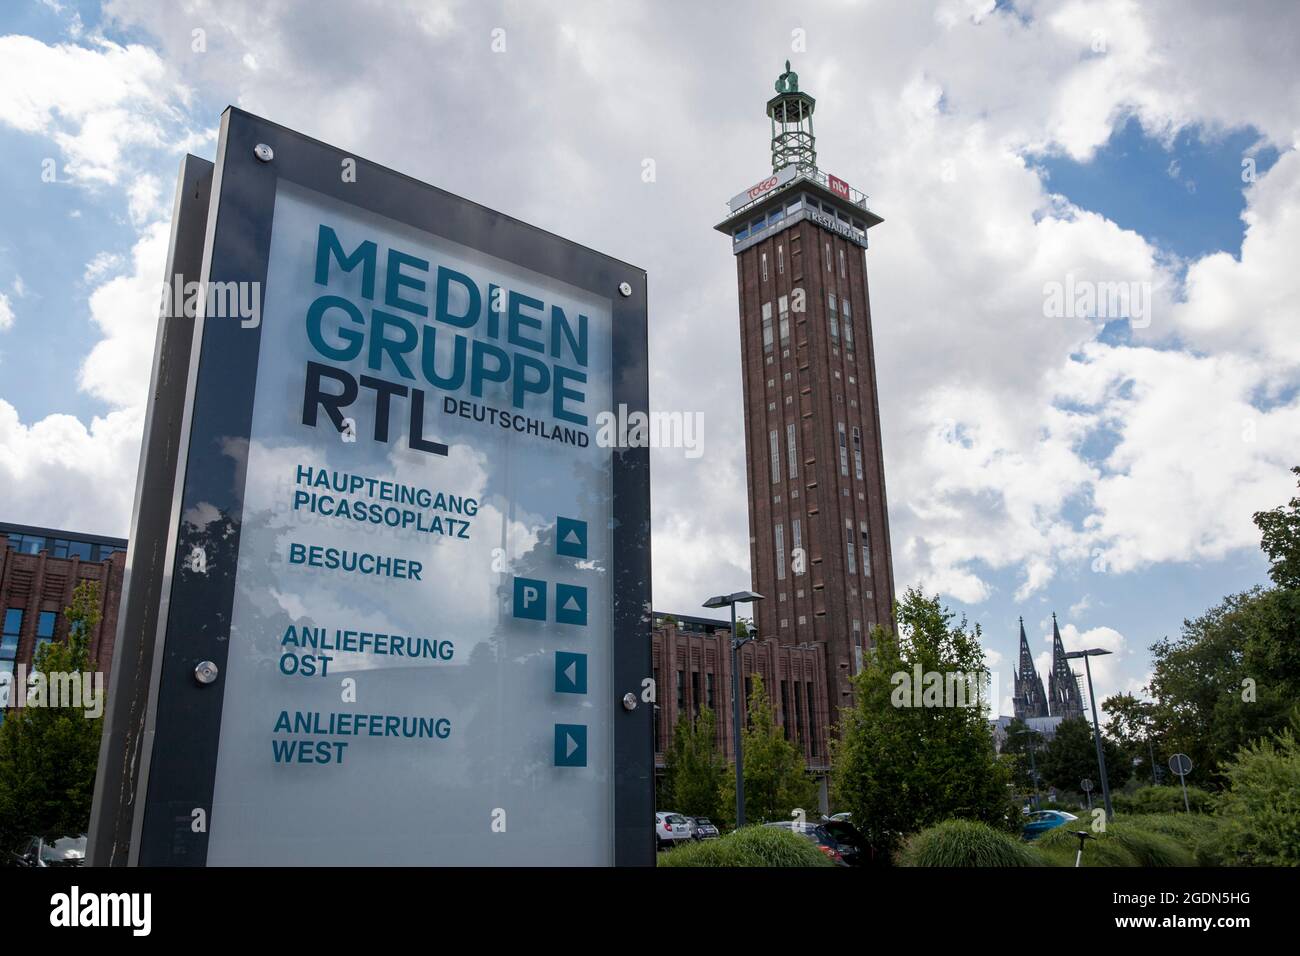 headquarters of the Media Group RTL Germany at Picassoplatz in Deutz, the old tower of the former exhibition center and the historic Rhein Halls, Colo Stock Photo